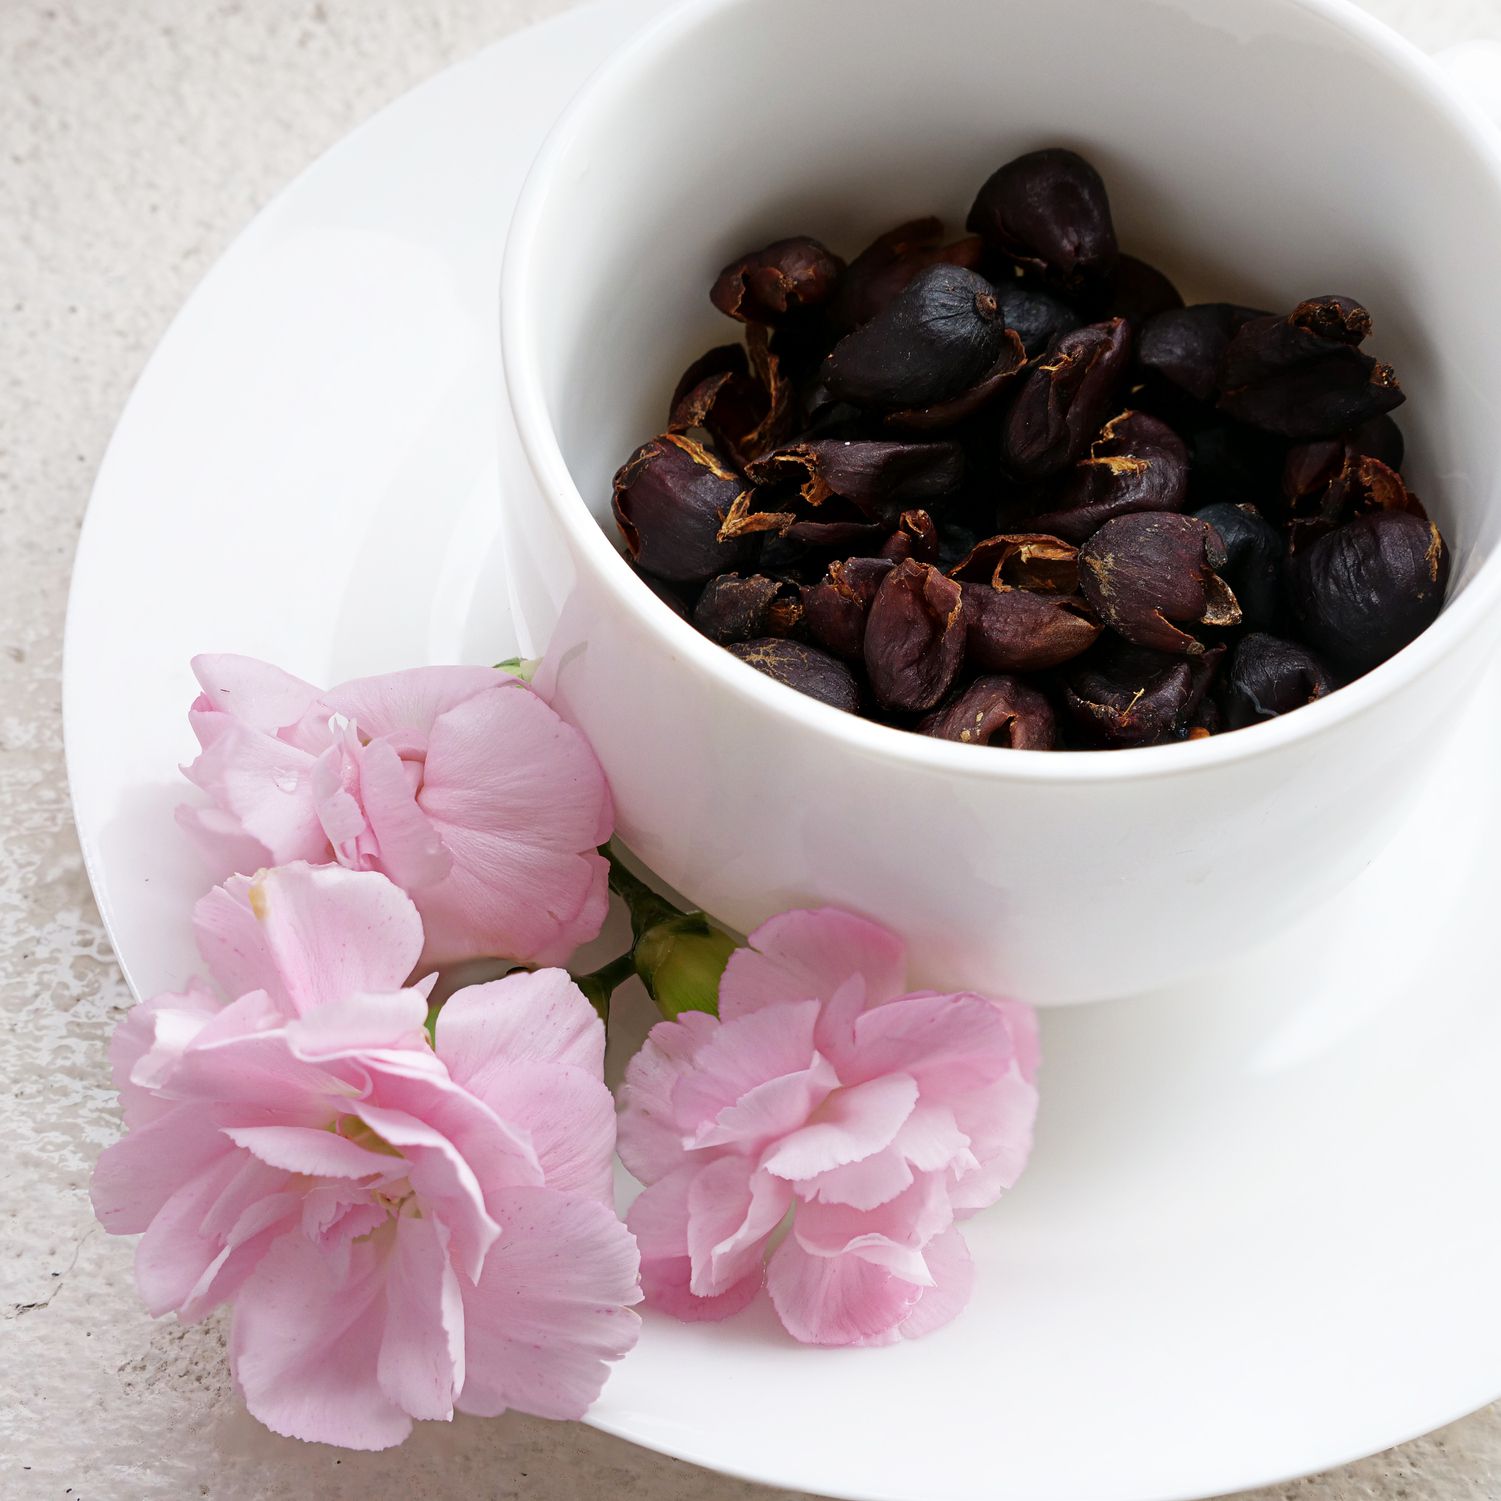 Cascara Benefits, Side Effects, and Preparations